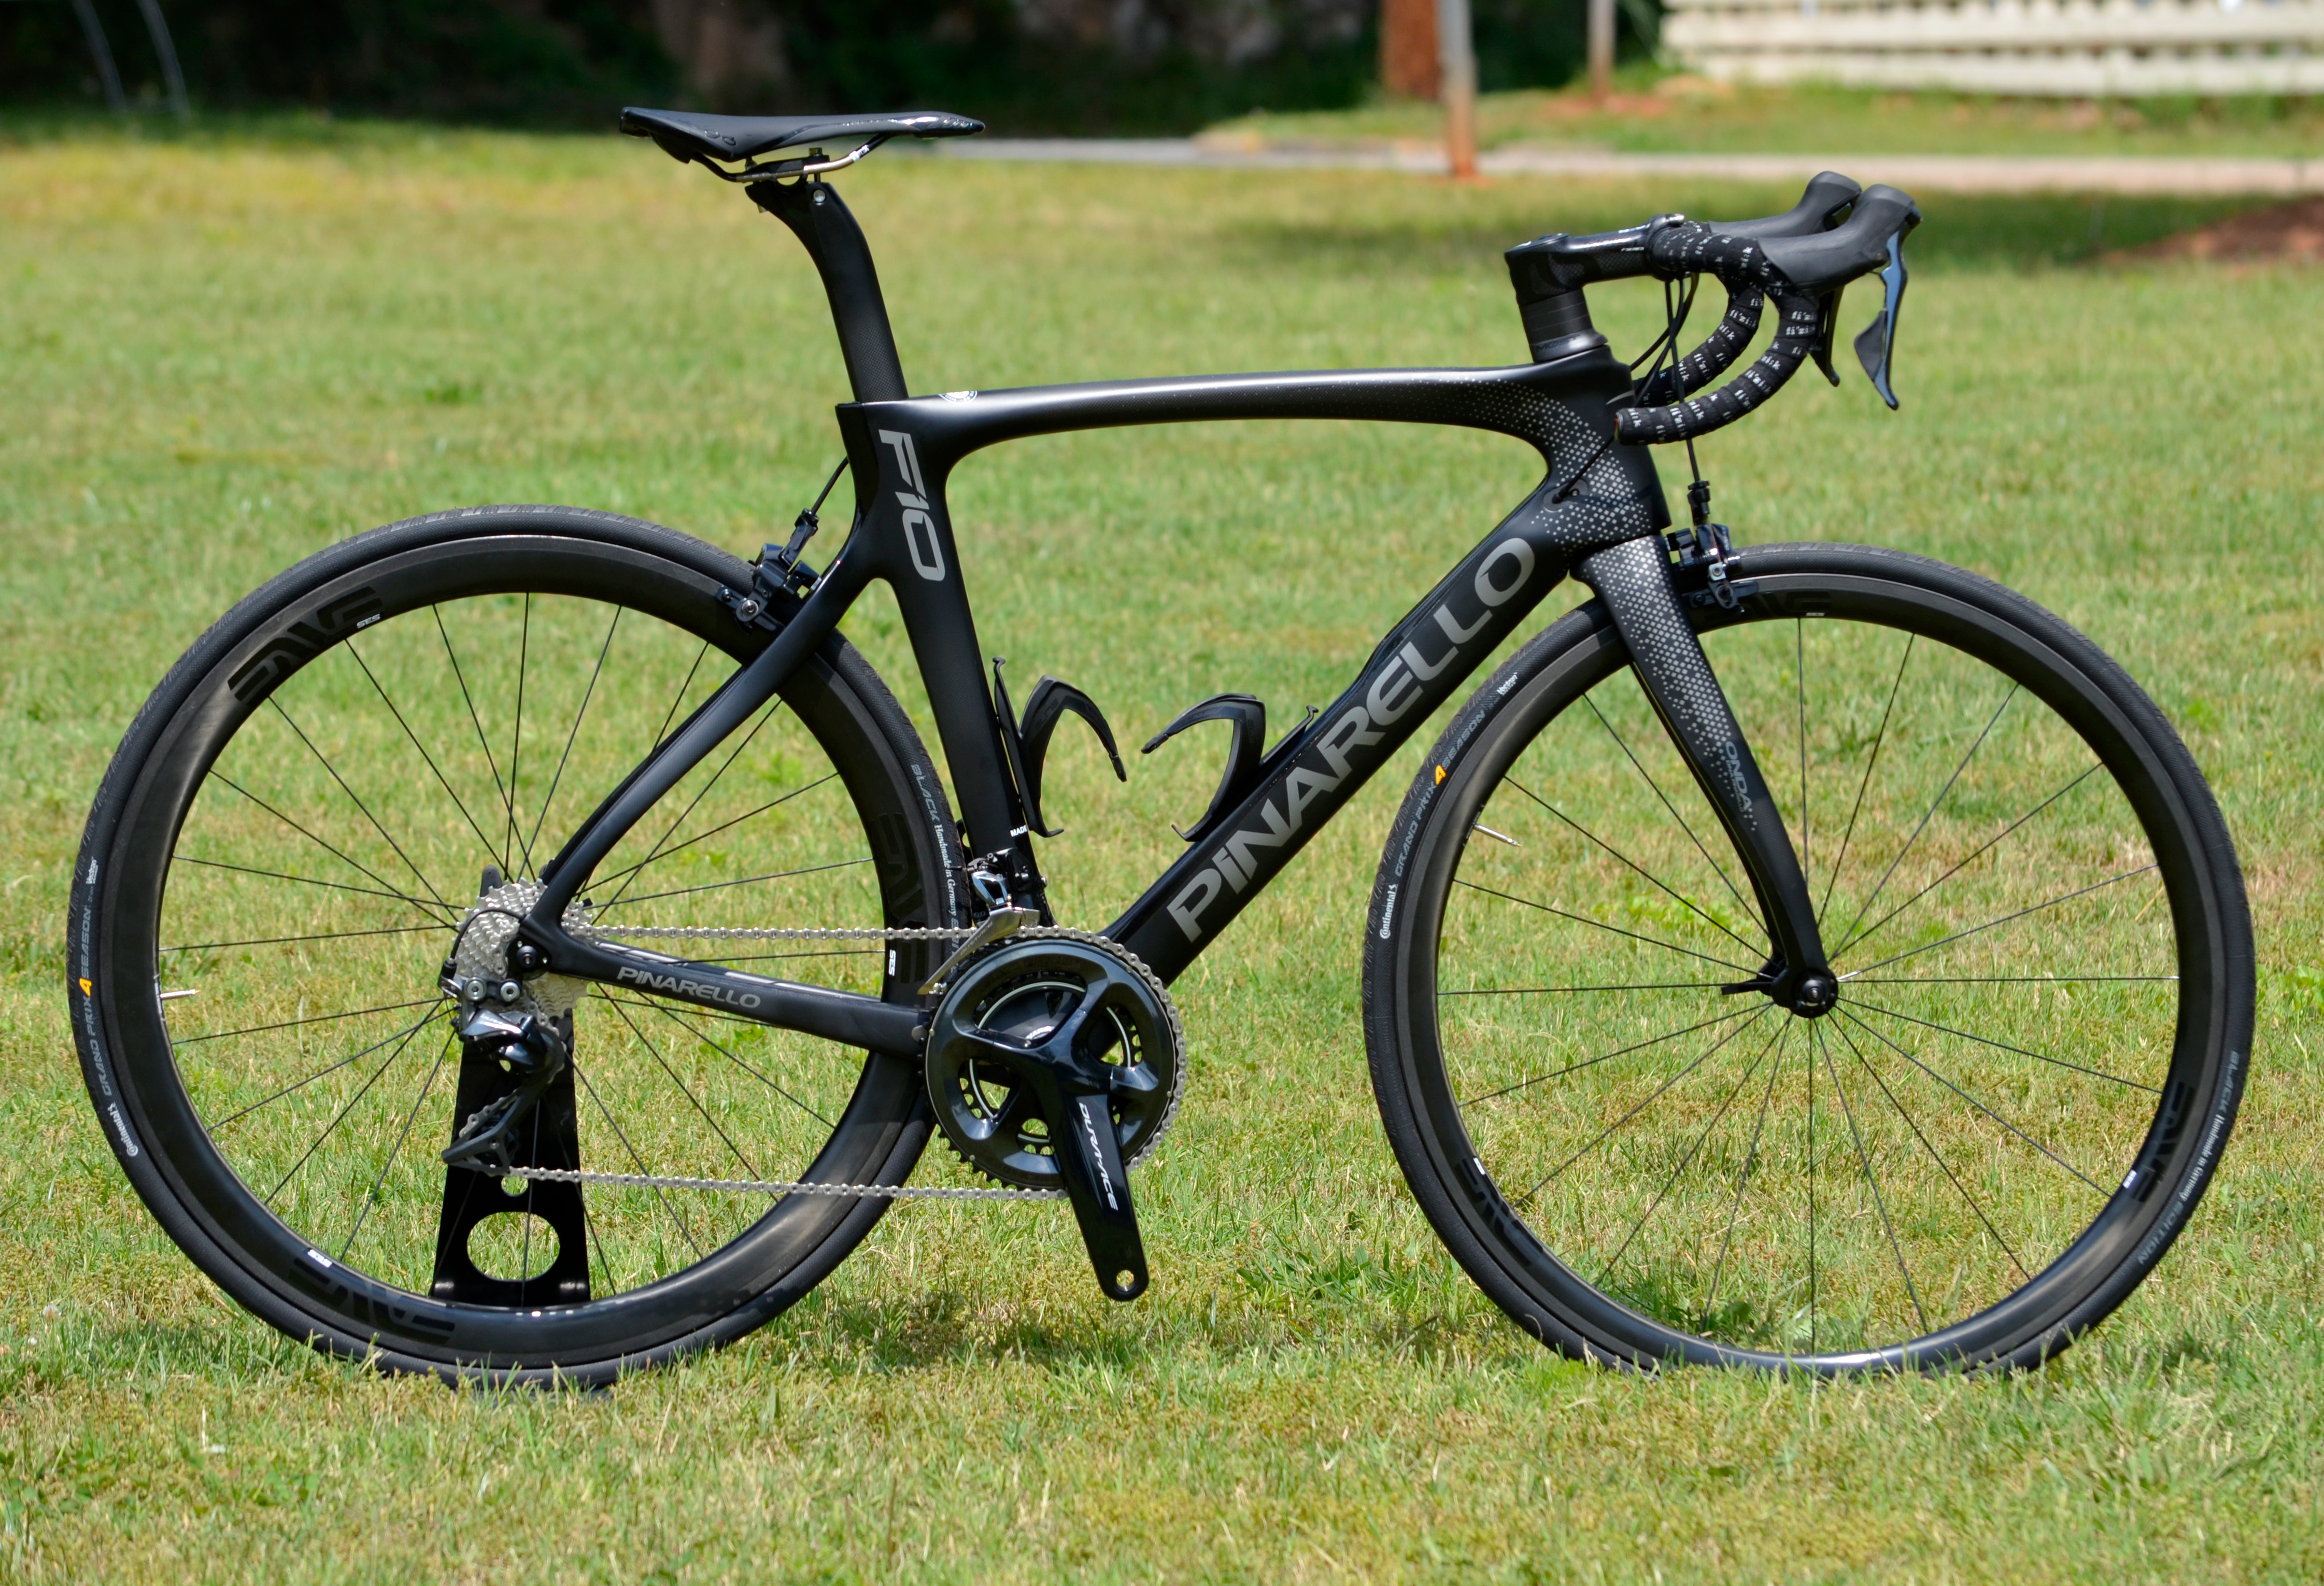 Reevaluating Price Versus Performance: Is Pinarello Worth the Investment?